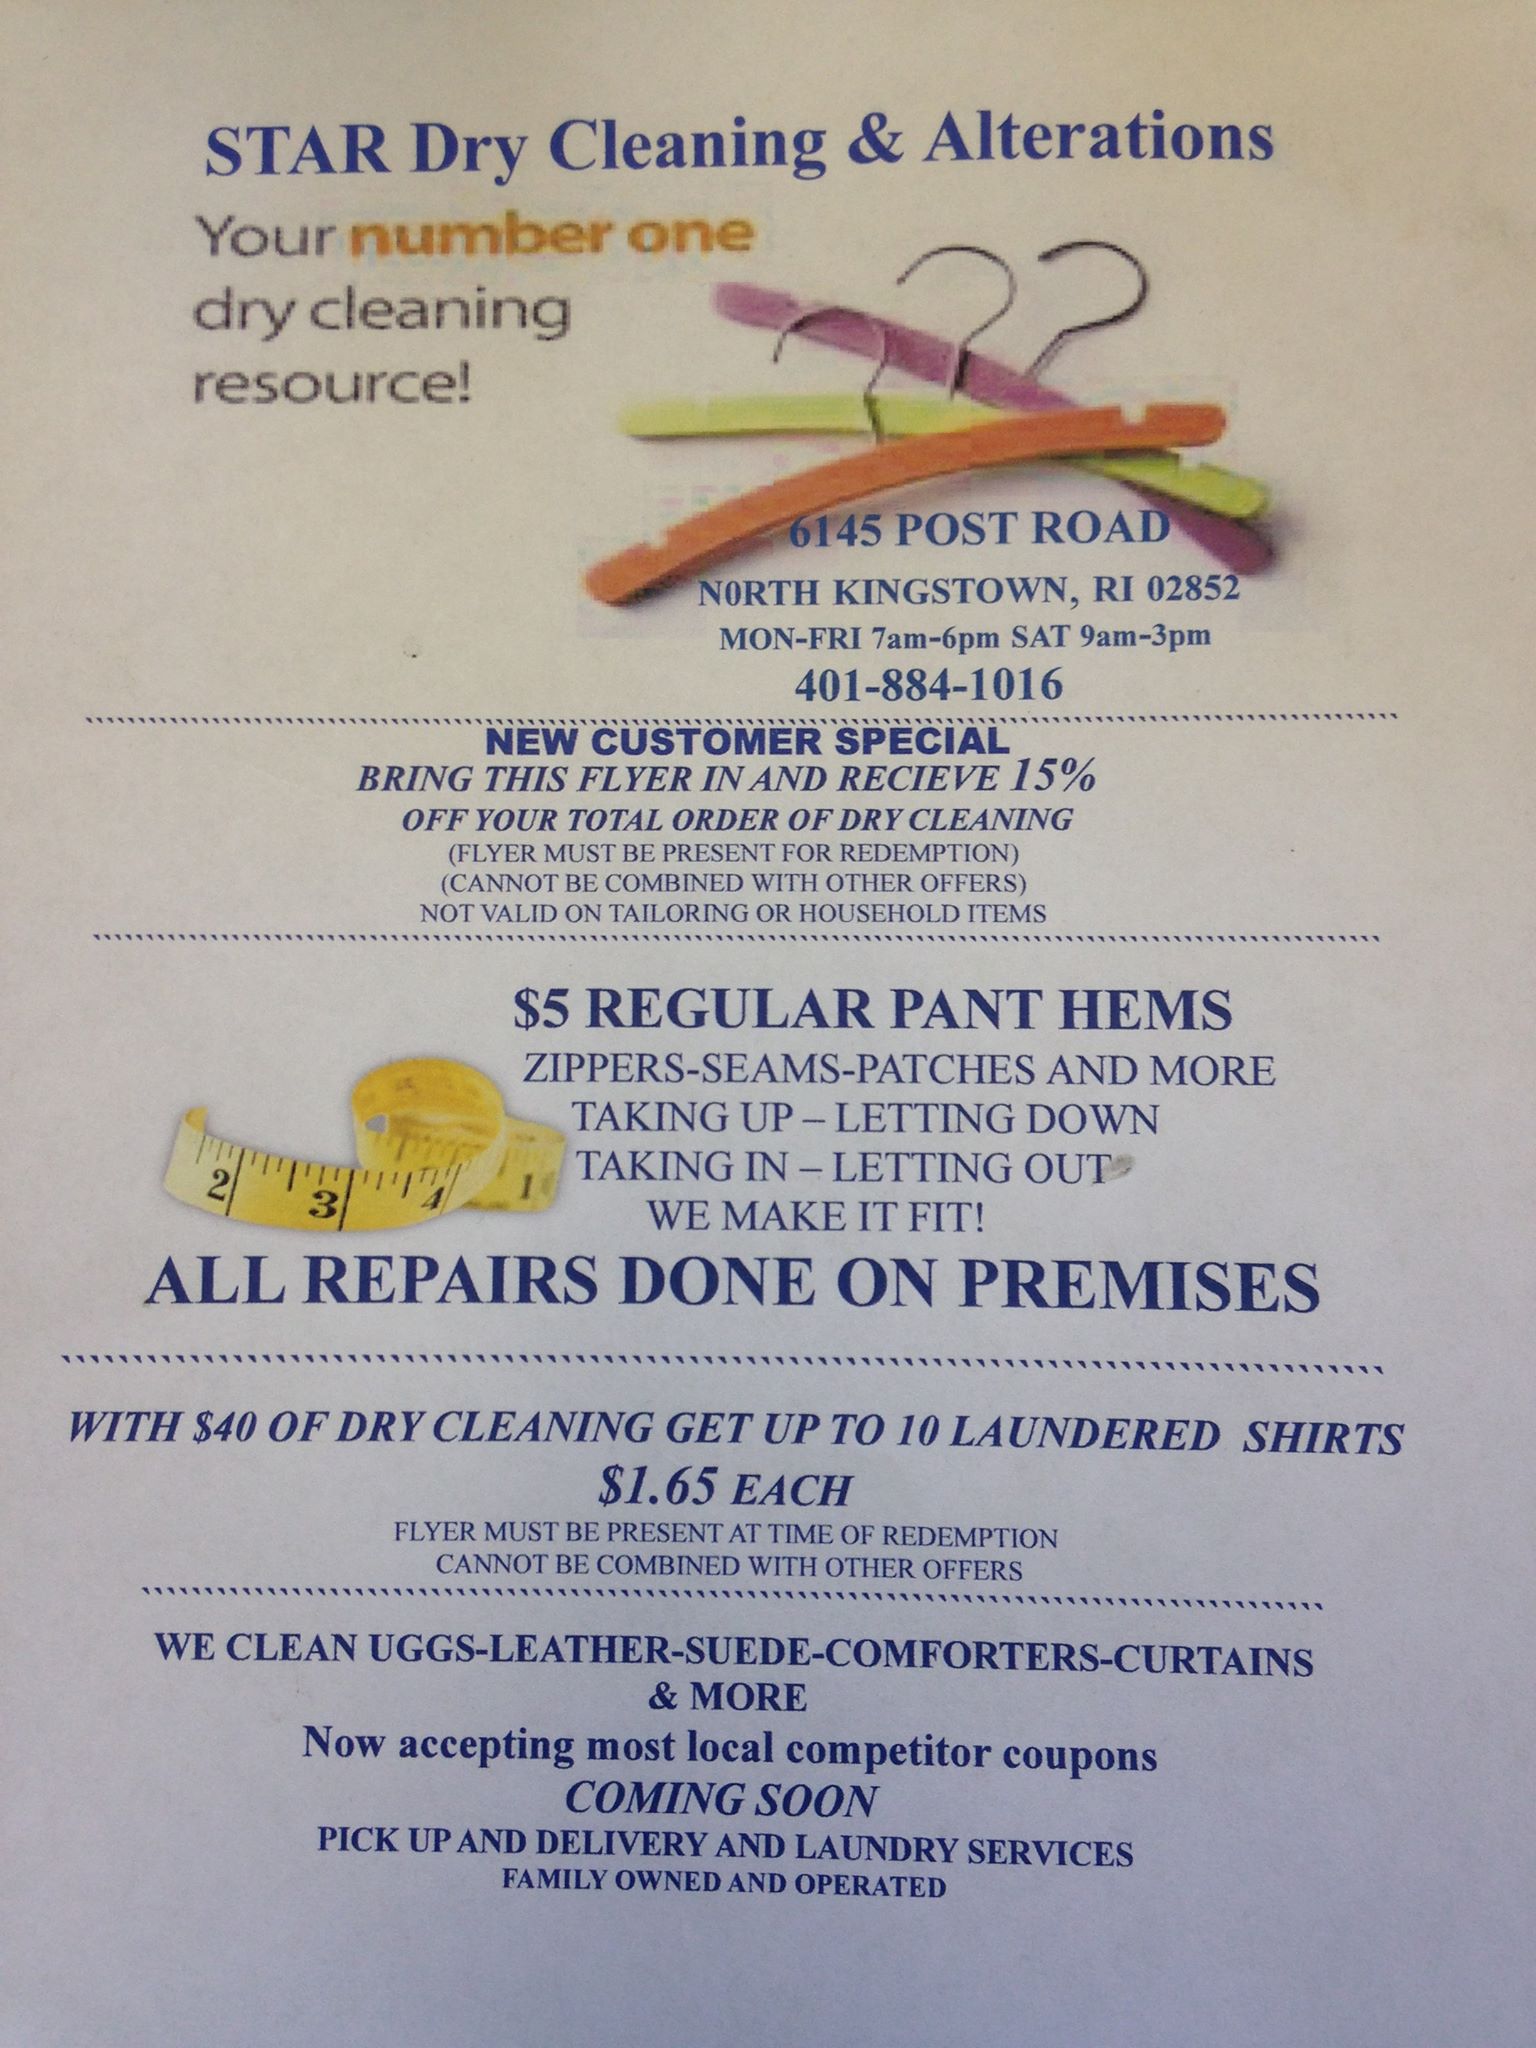 Star Dry Cleaning & Alterations